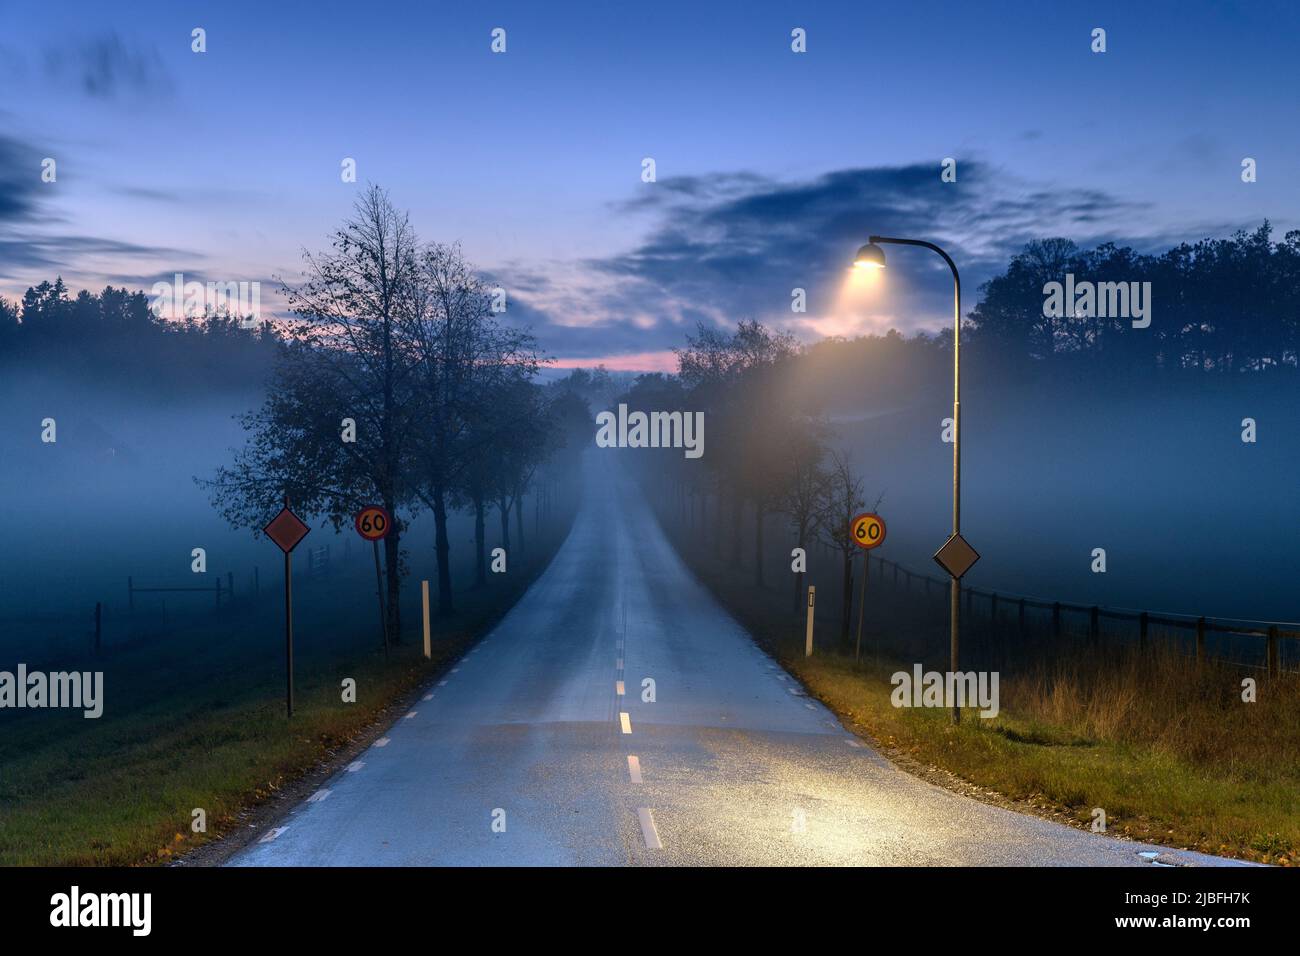 Street light by road at sunset Stock Photo